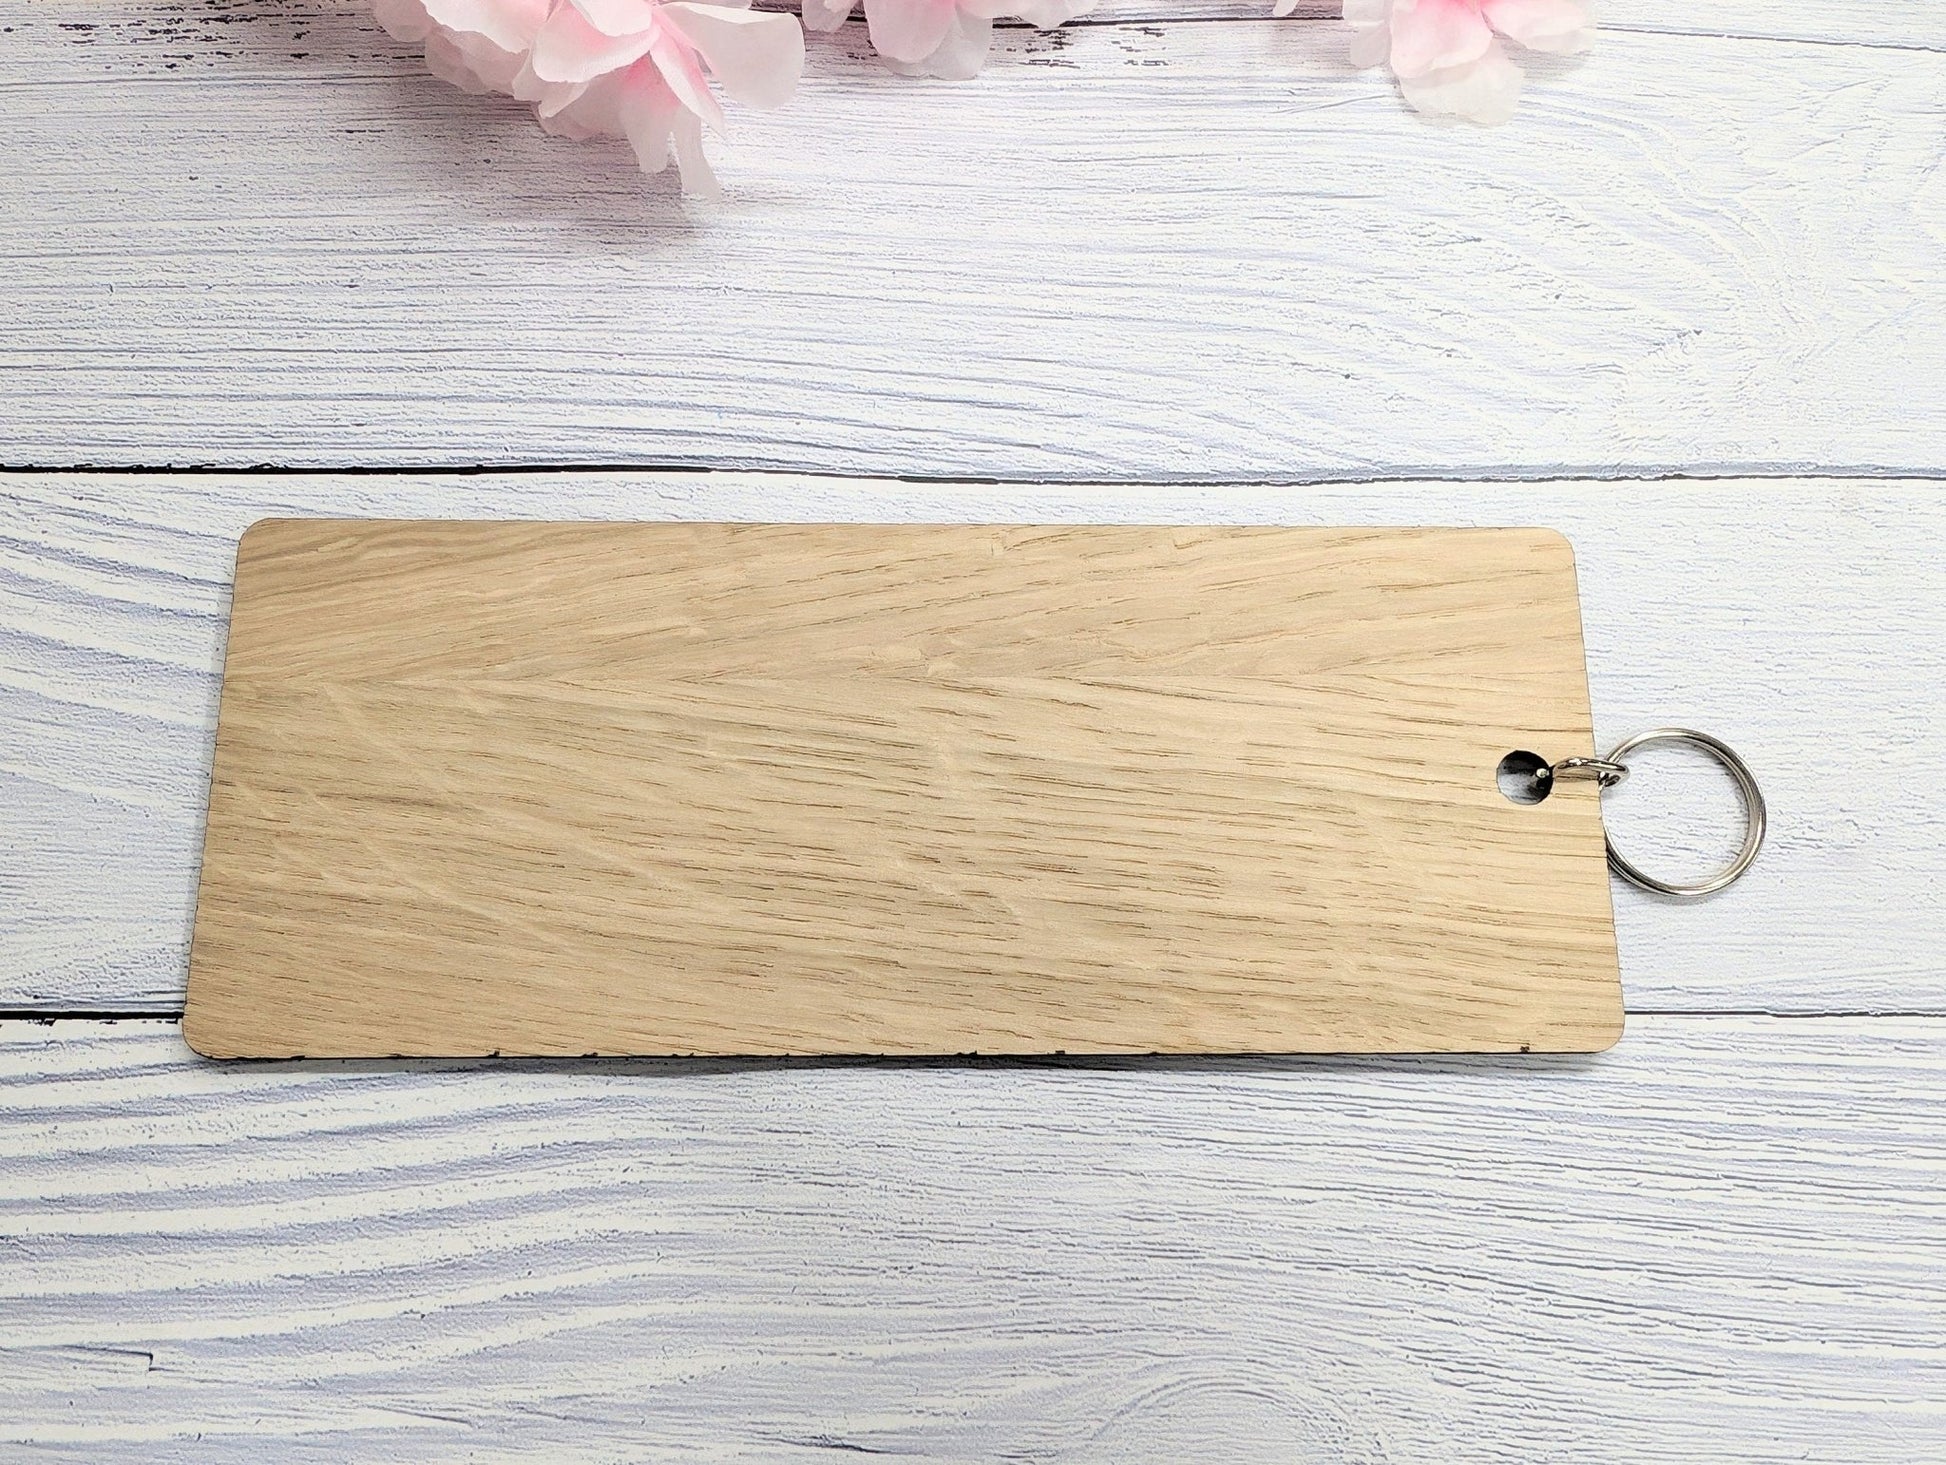 Extra-Large Wooden Keyring 'Master Key - Do Not Remove From Office' - Ideal for Important Keys | Handcrafted in Wales, Eco-Friendly Oak - CherryGroveCraft